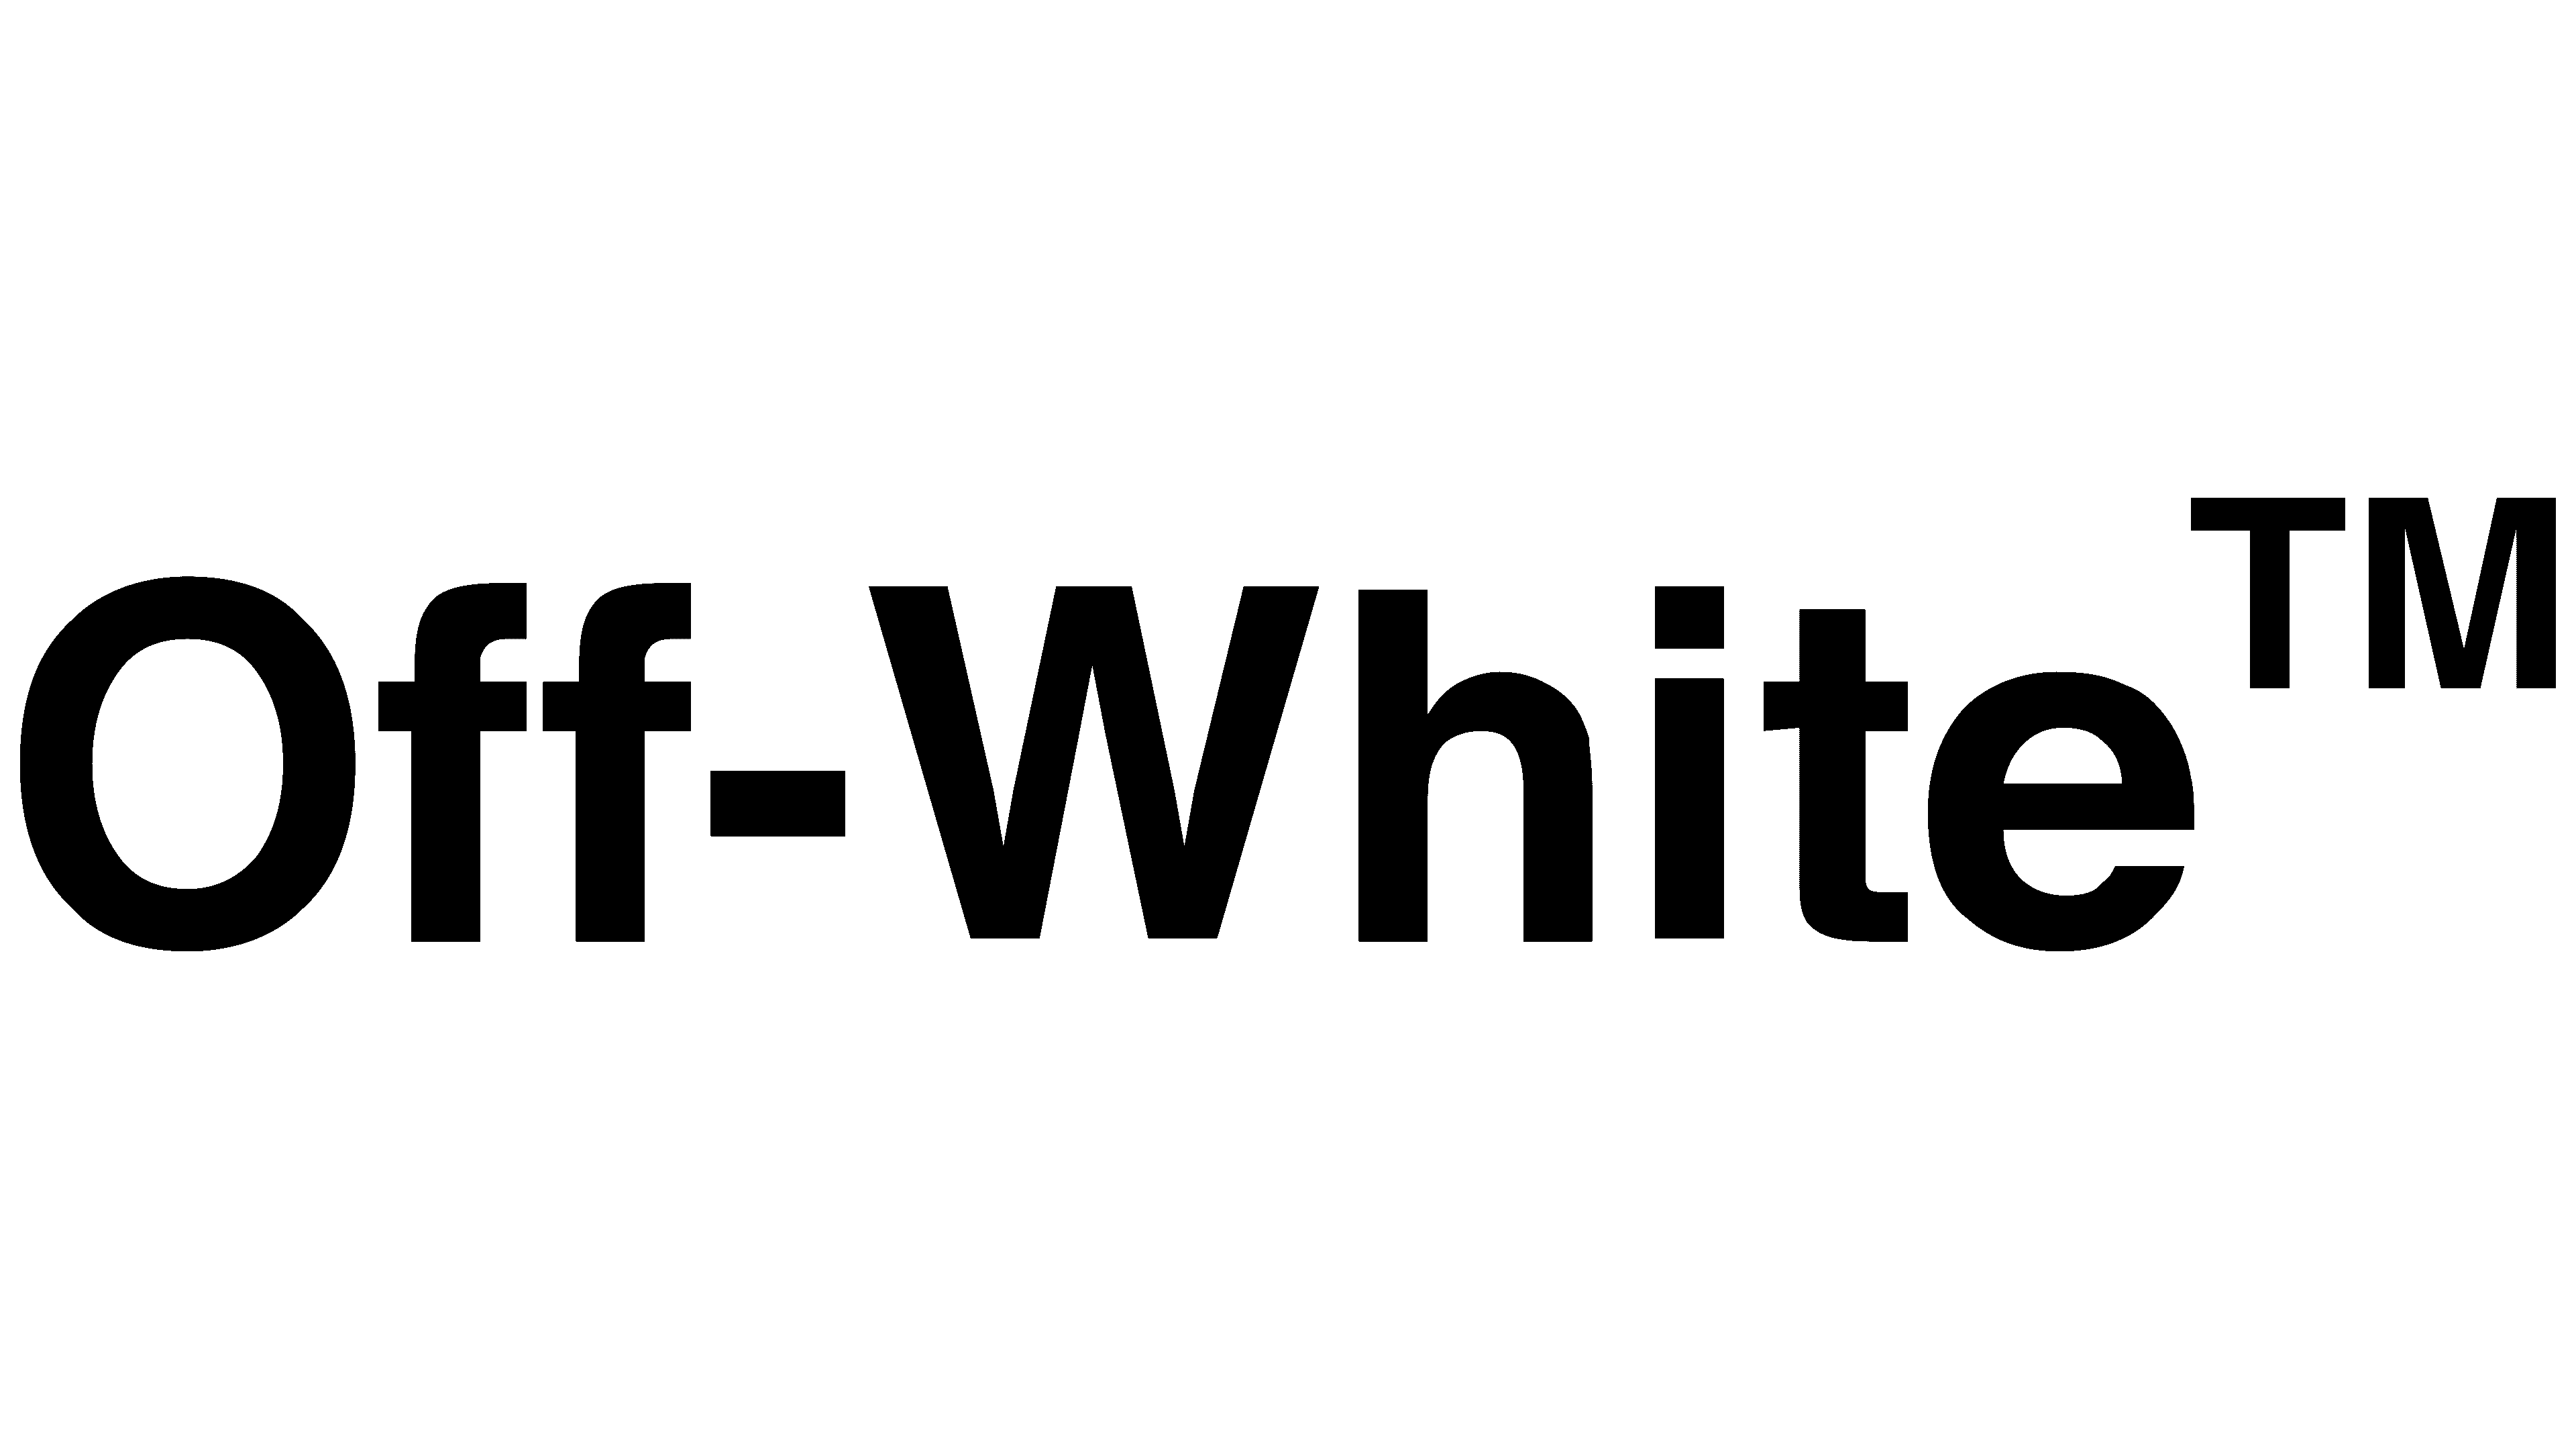 Cambiable uvas Dónde Off White Logo, symbol, meaning, history, PNG, brand